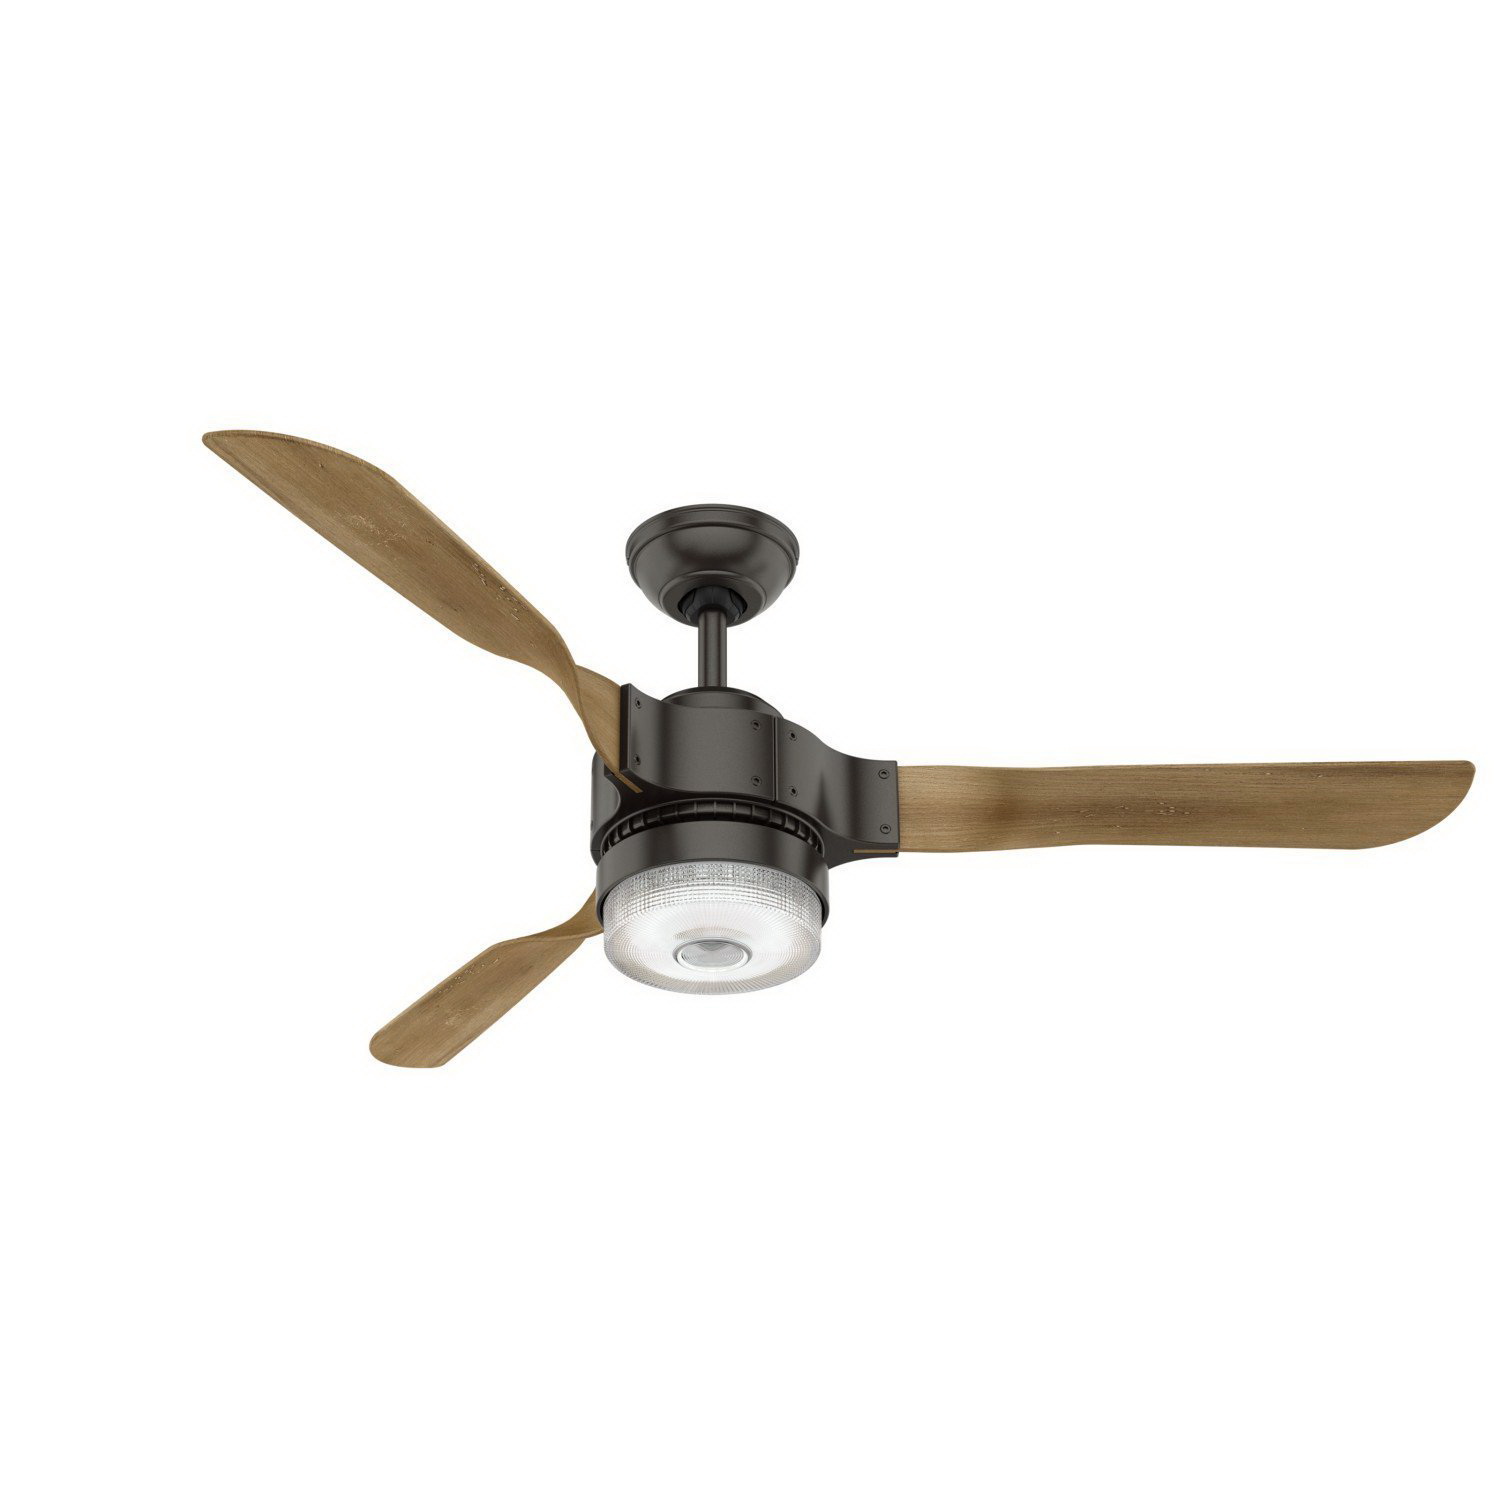 SIMPLEconnect Wi-Fi Series 59226 Ceiling Fan with Light Kit, Plastic, Noble Bronze